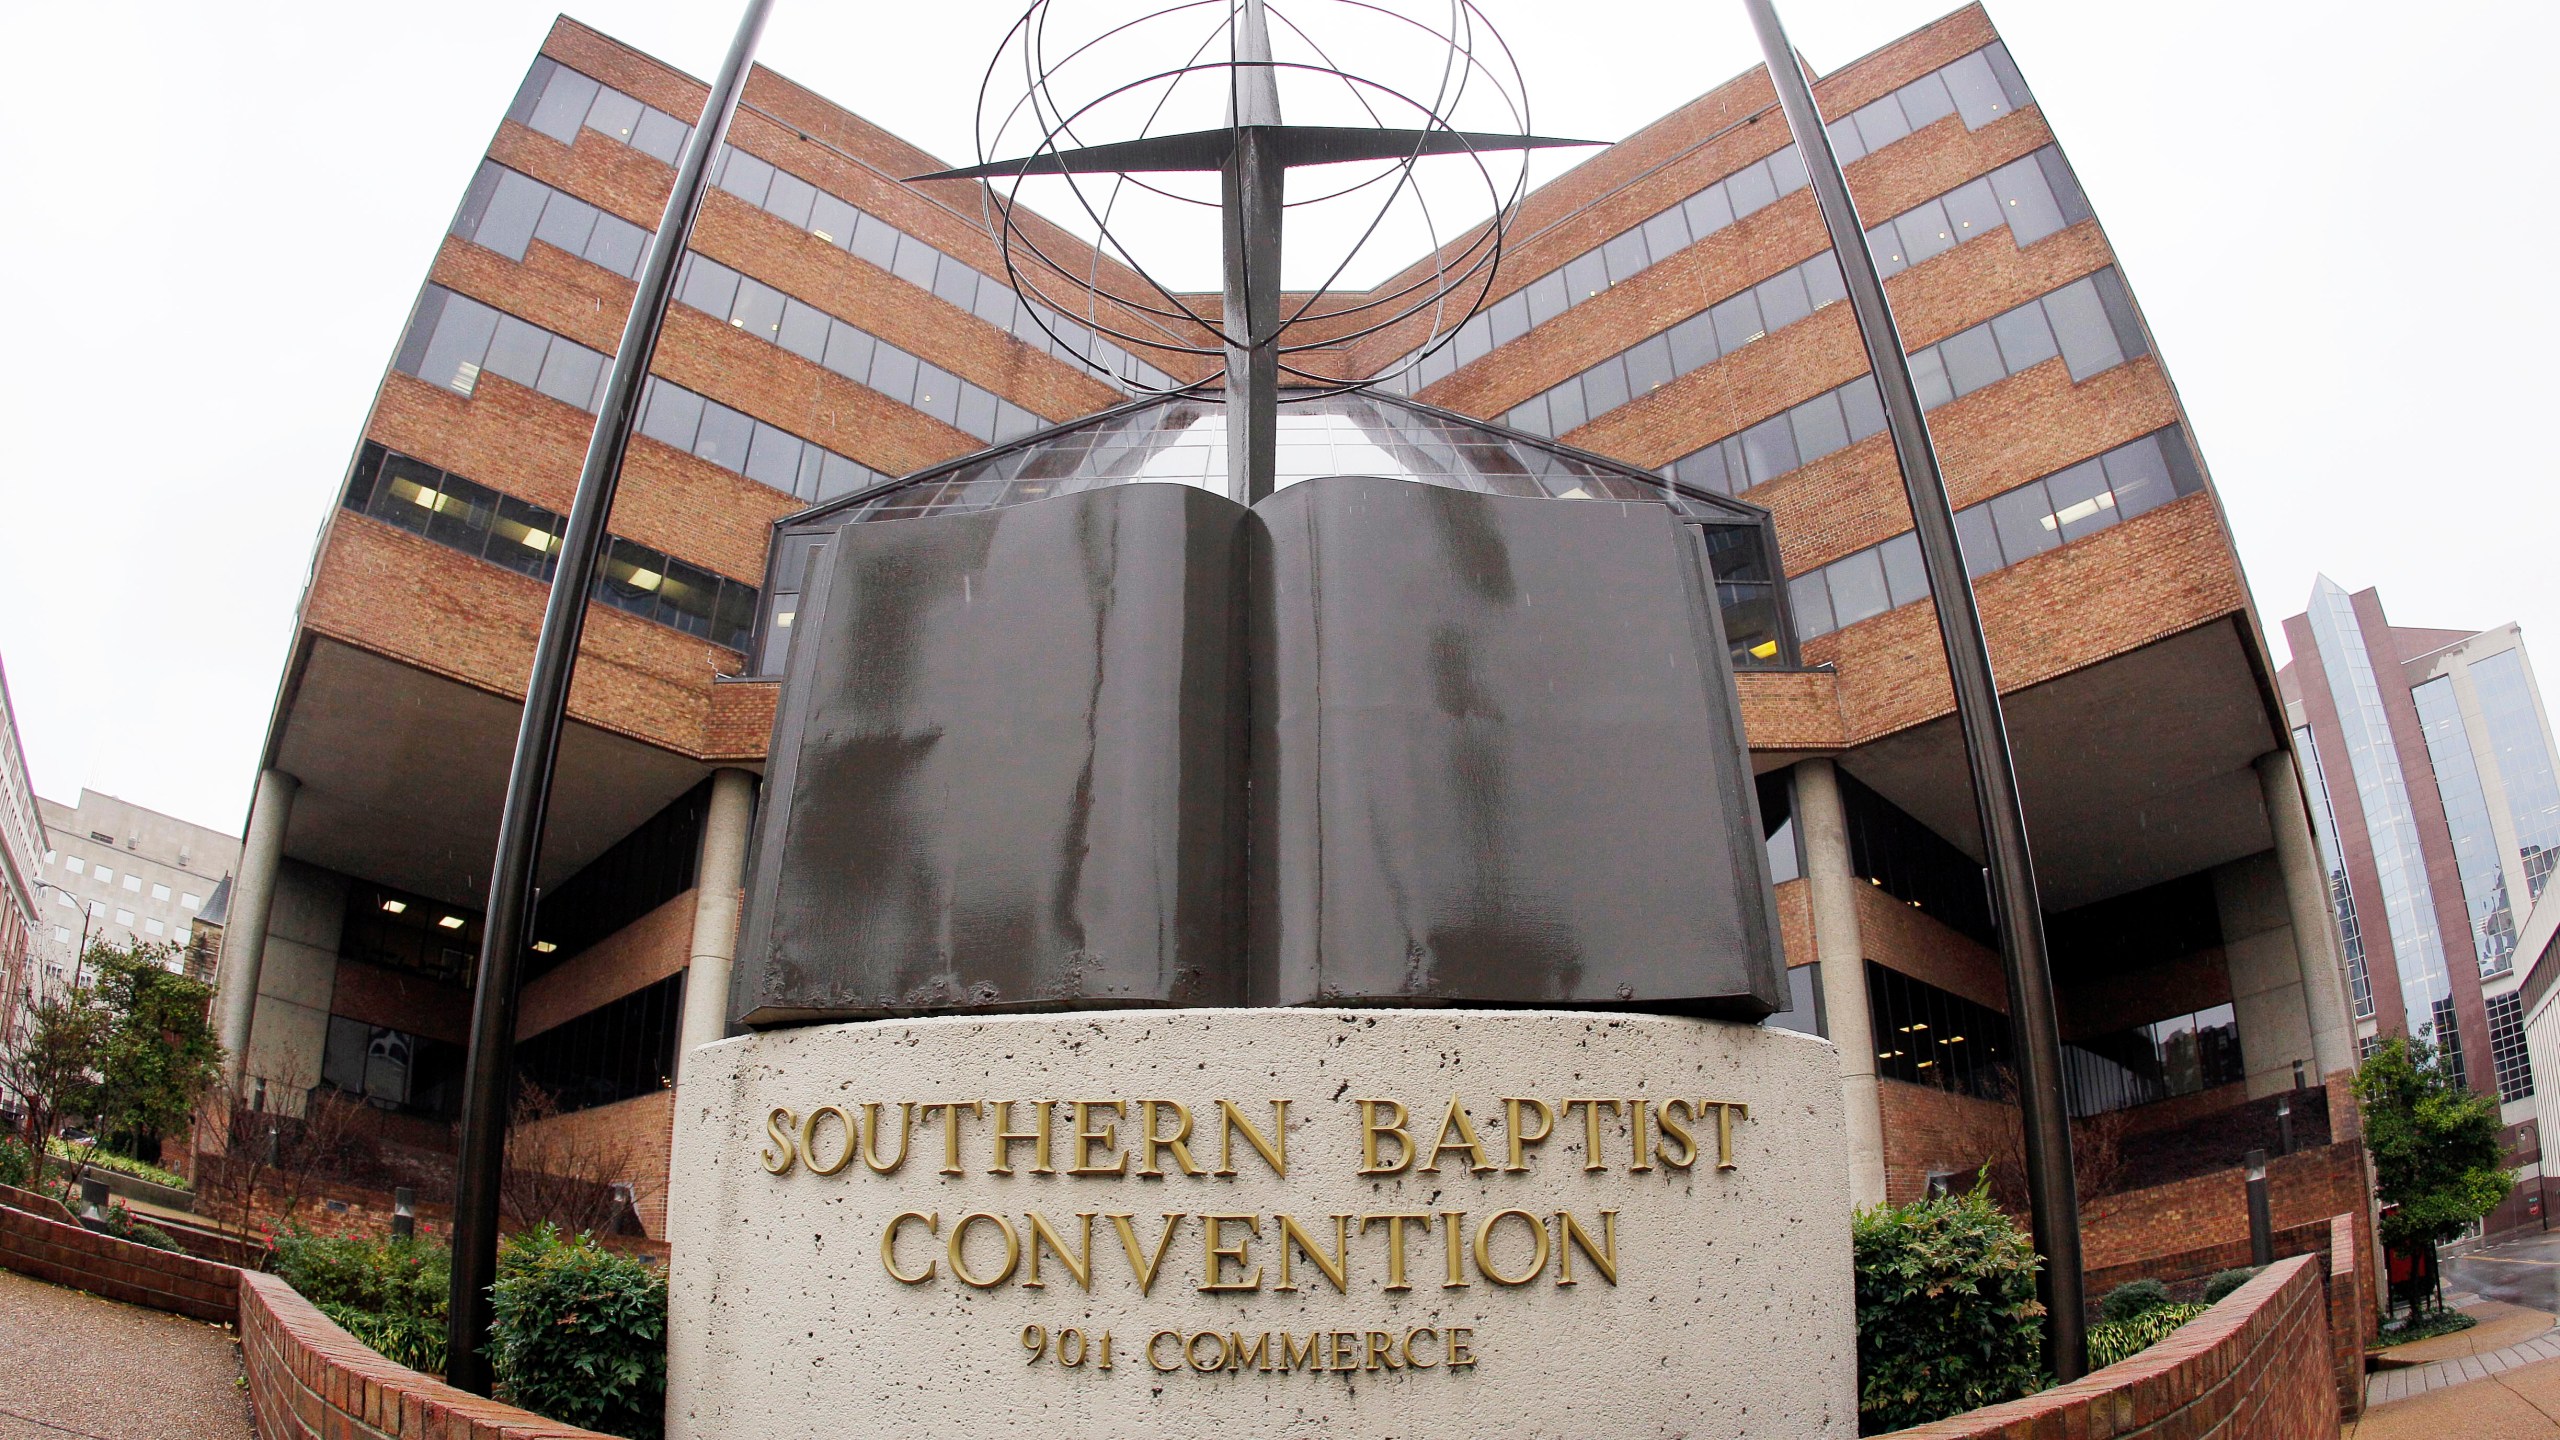 FILE - This Wednesday, Dec. 7, 2011 file photo shows the headquarters of the Southern Baptist Convention in Nashville, Tenn. (AP Photo/Mark Humphrey, File)